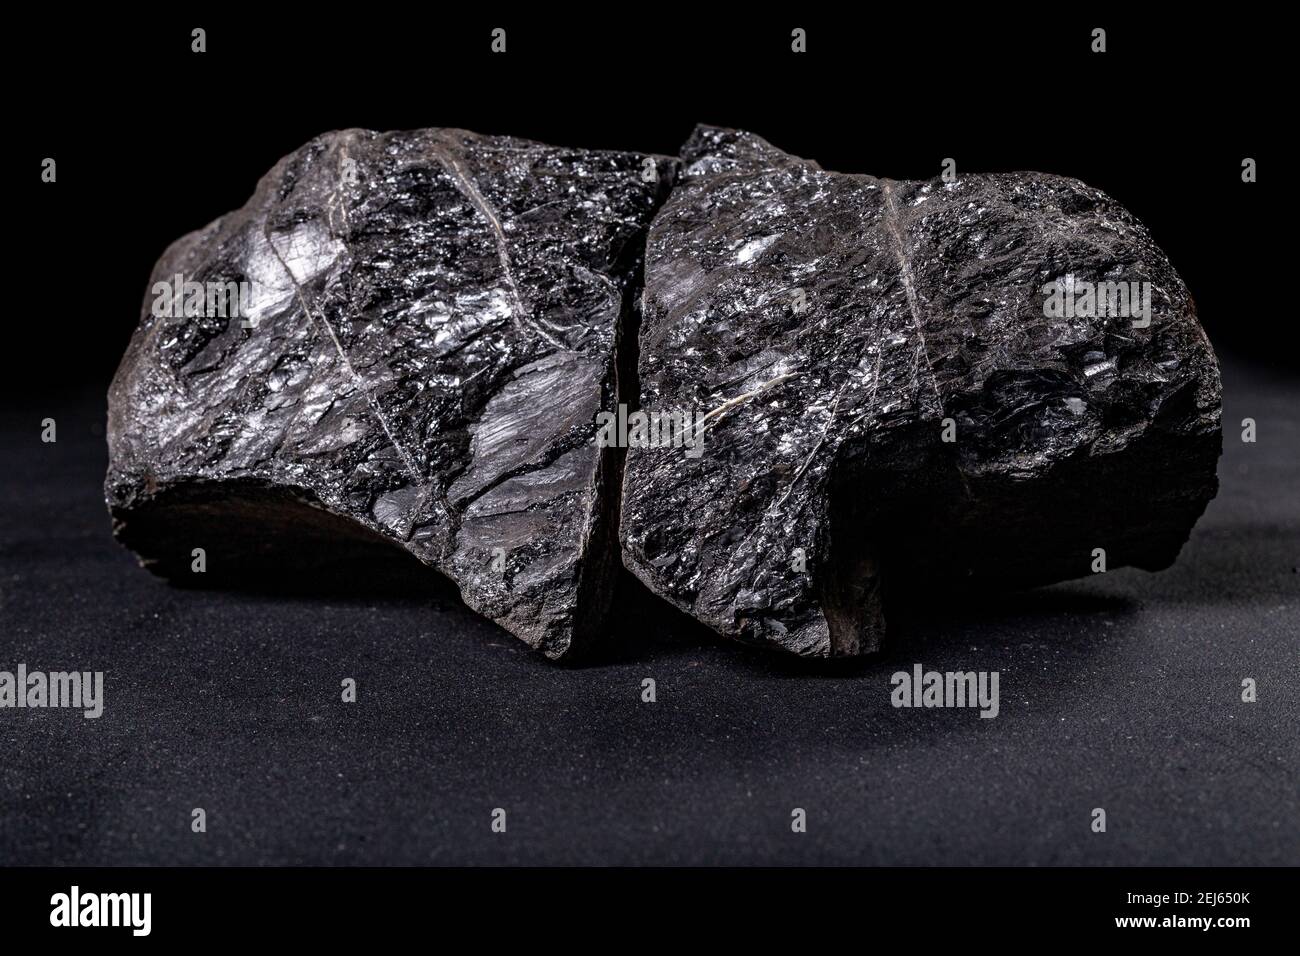 A lump of brown coal laid on a table. Mineral used to generate energy. Dark background. Stock Photo